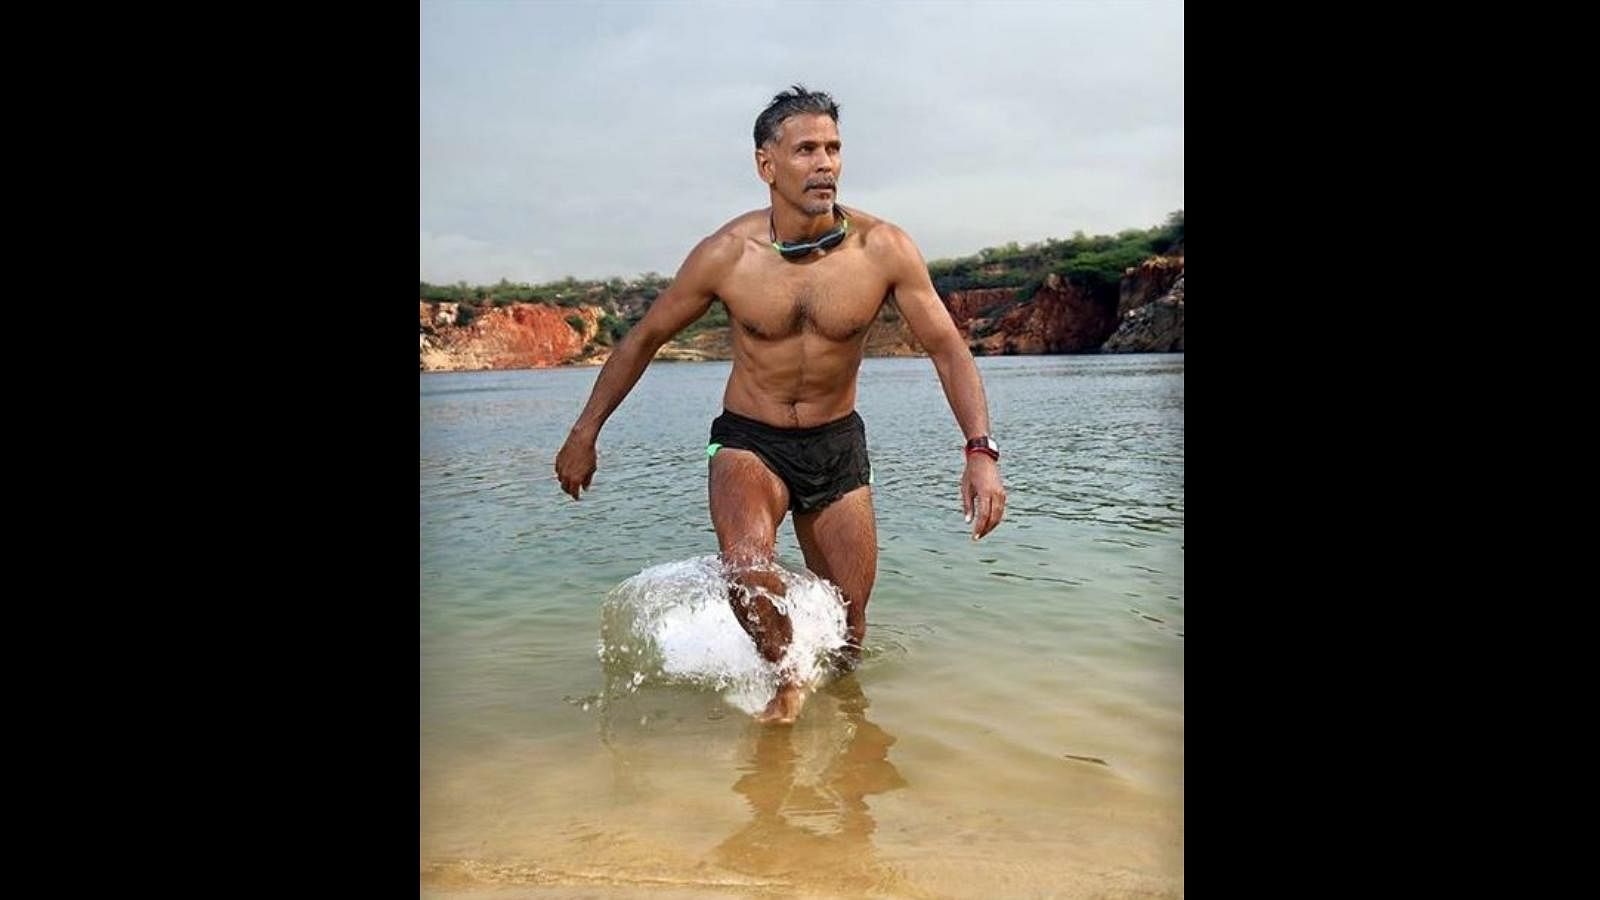 Milind Soman at the Zurich Lake during the swimming segment of the Ironman race.(Photo: <a href="https://twitter.com/milindrunning">Twitter/@milindrunning</a>)